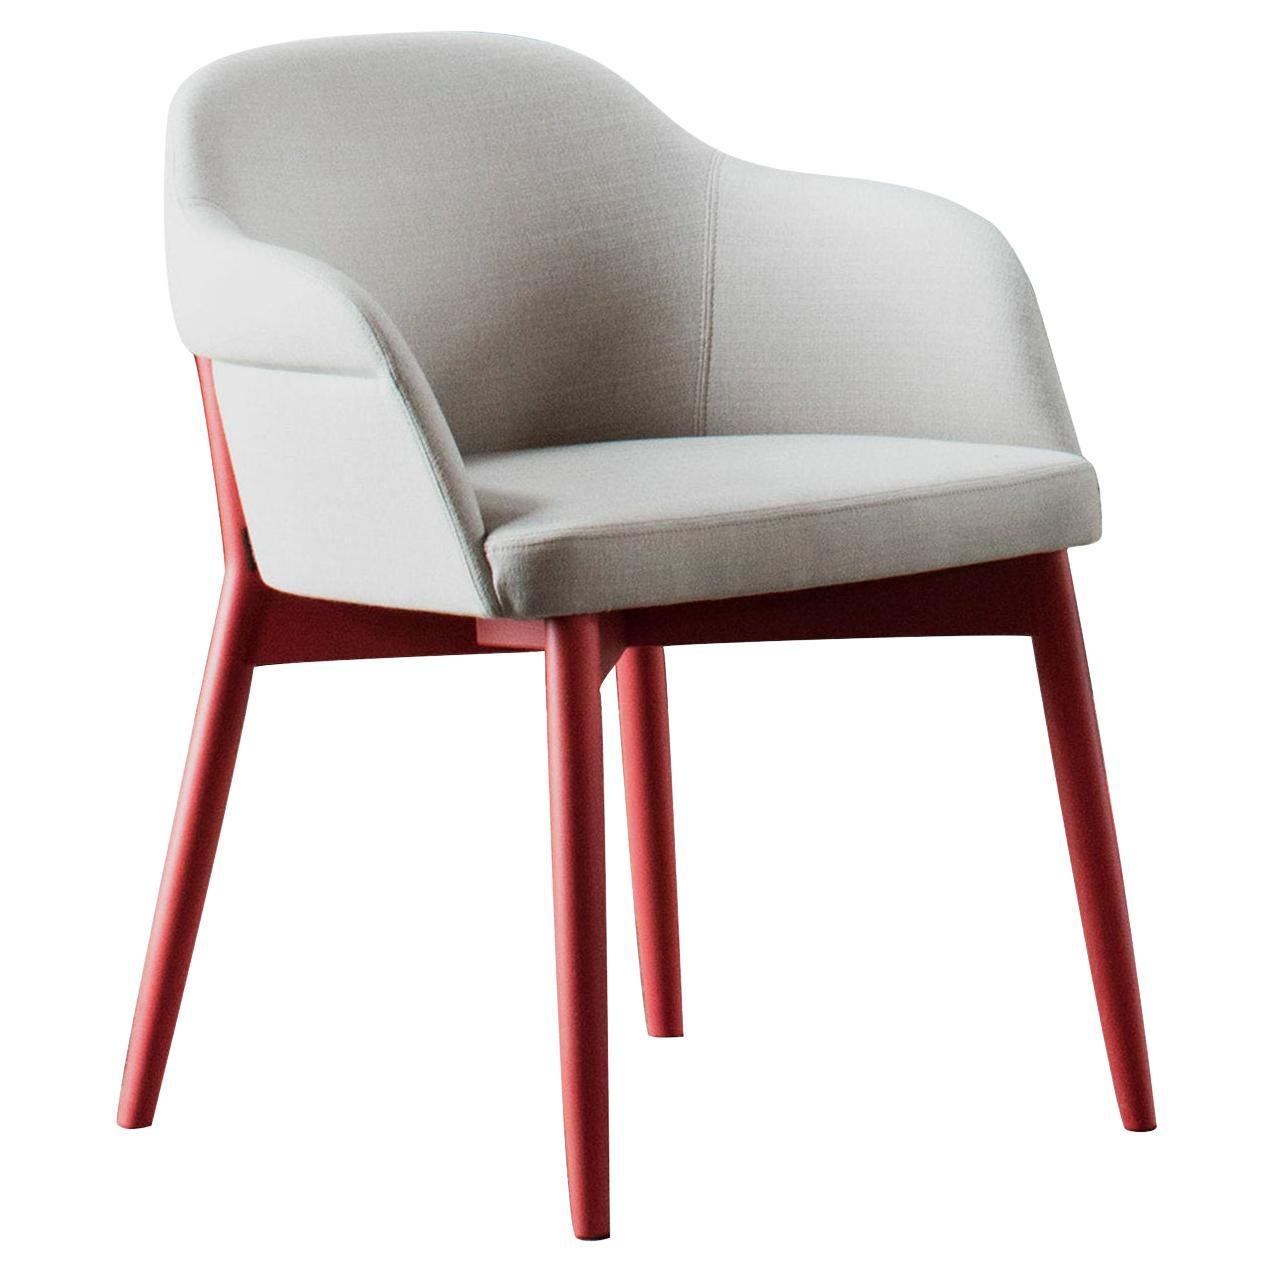 Spy 650 White and Red Armchair by Emilio Nanni